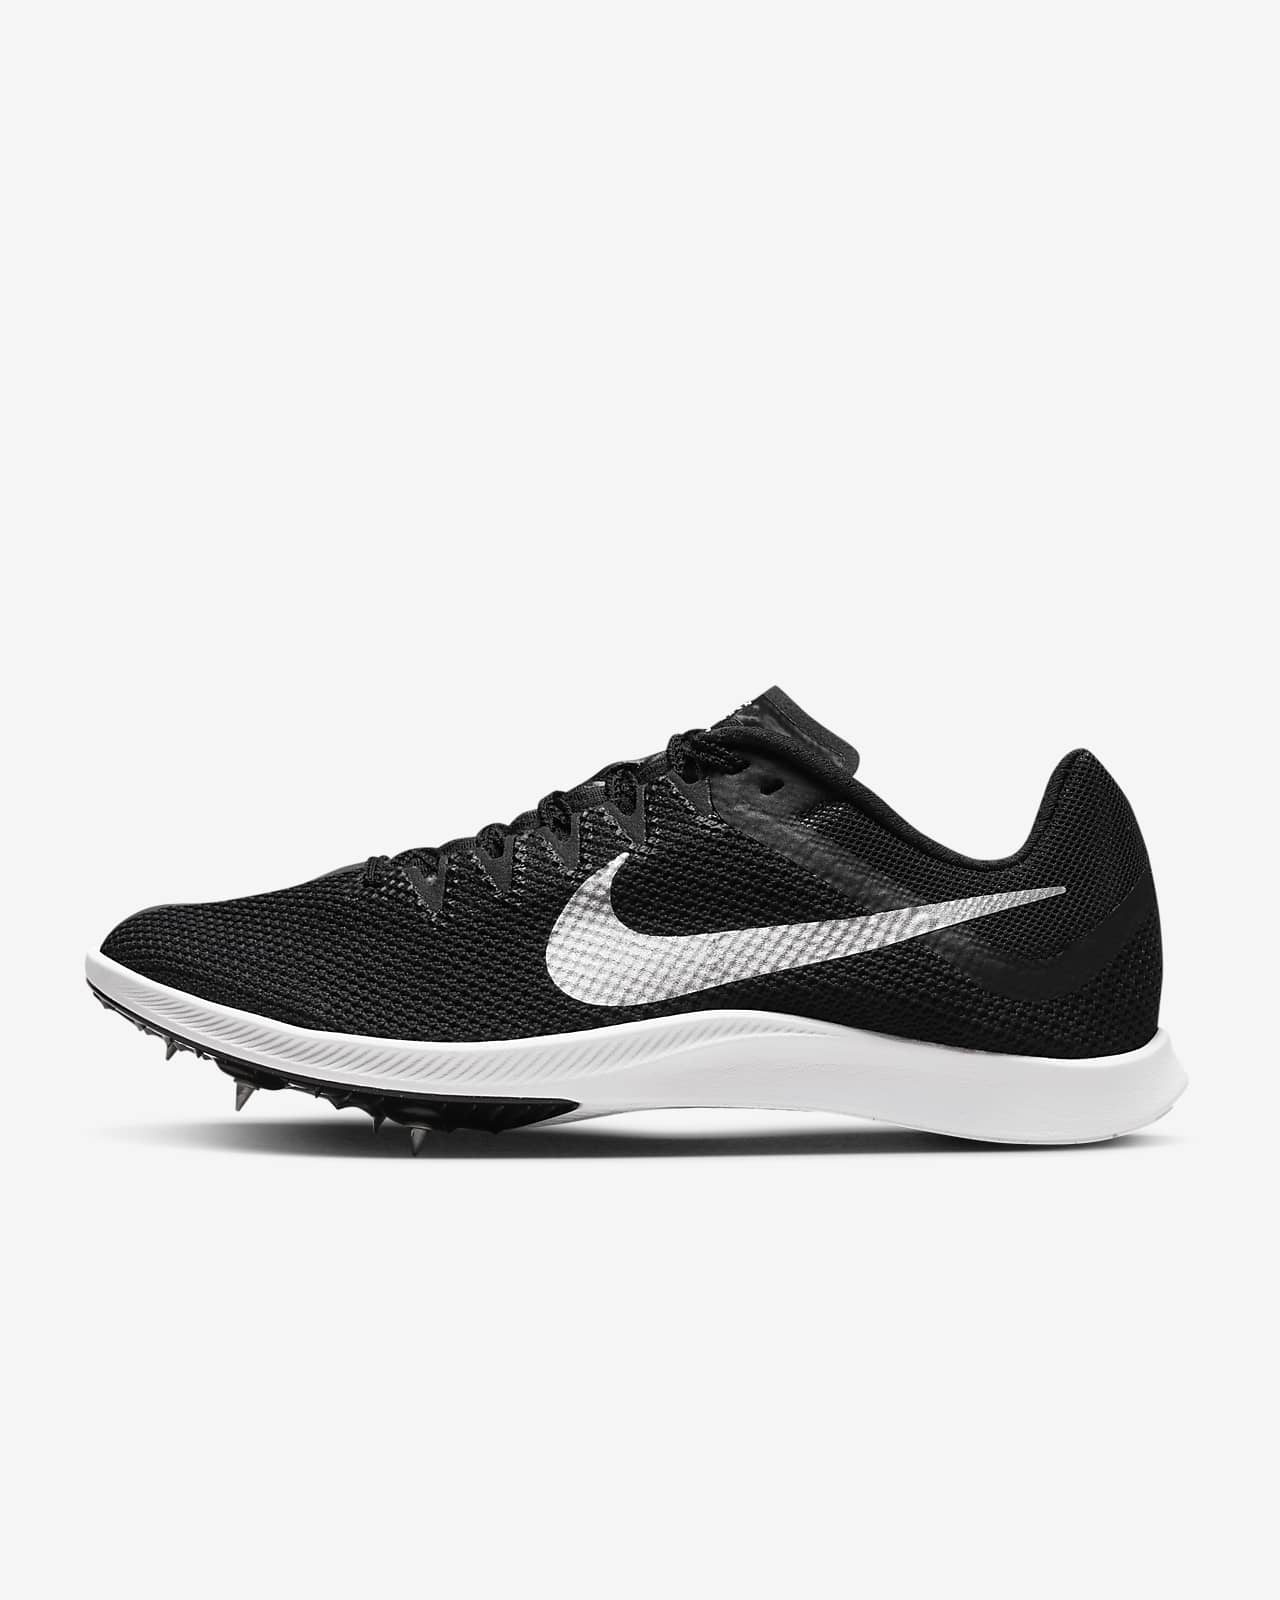 Nike Rival Distance Track and Field distance spikes